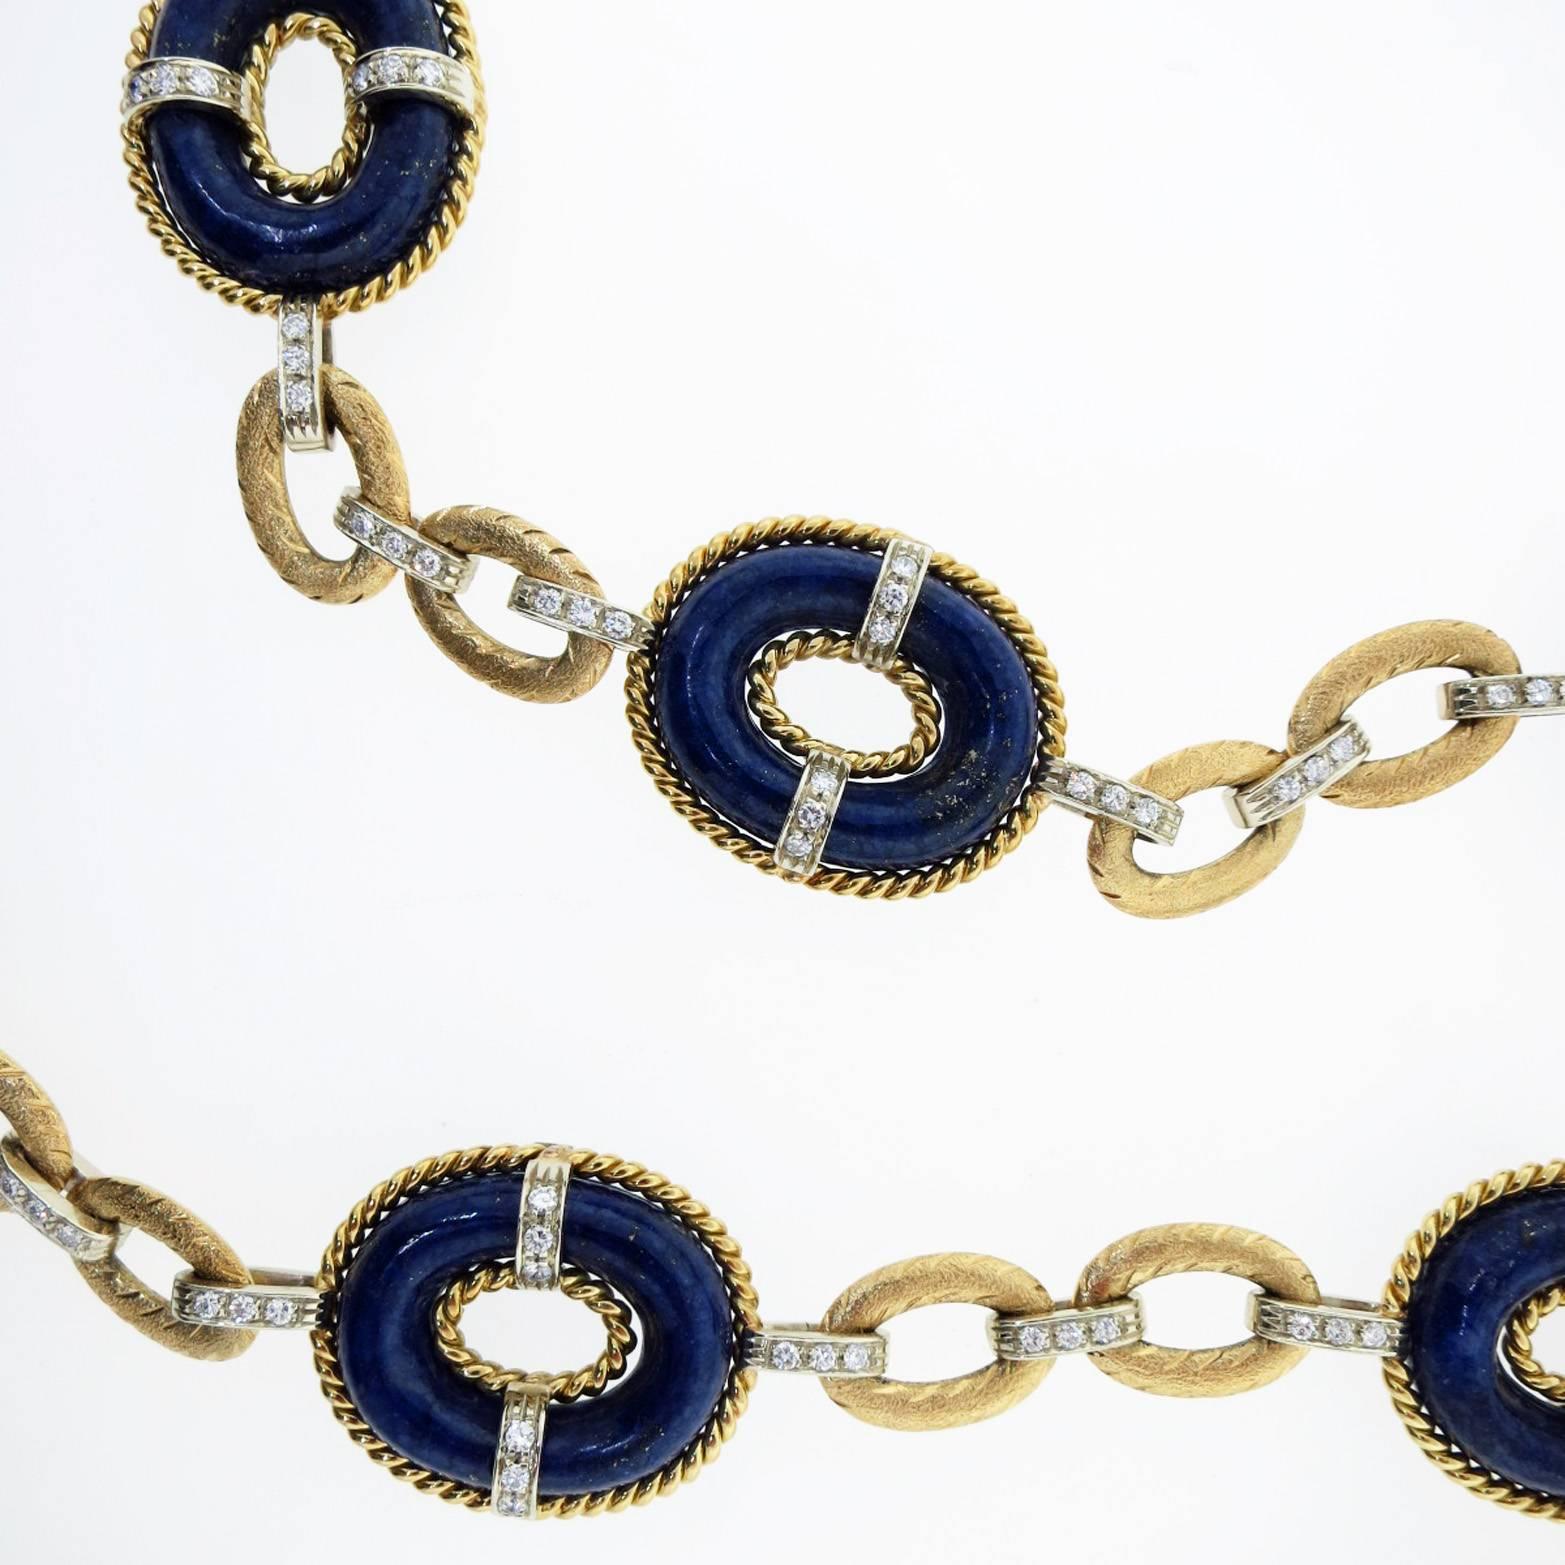 Substantial in weight and glamorous in design 18kt. yellow and white gold 29 inch link necklace consisting of 9 oval natural Lapis Lazuli rope edge links. The connector links and Lapis links are bead set in white gold with 136 round brilliant cut